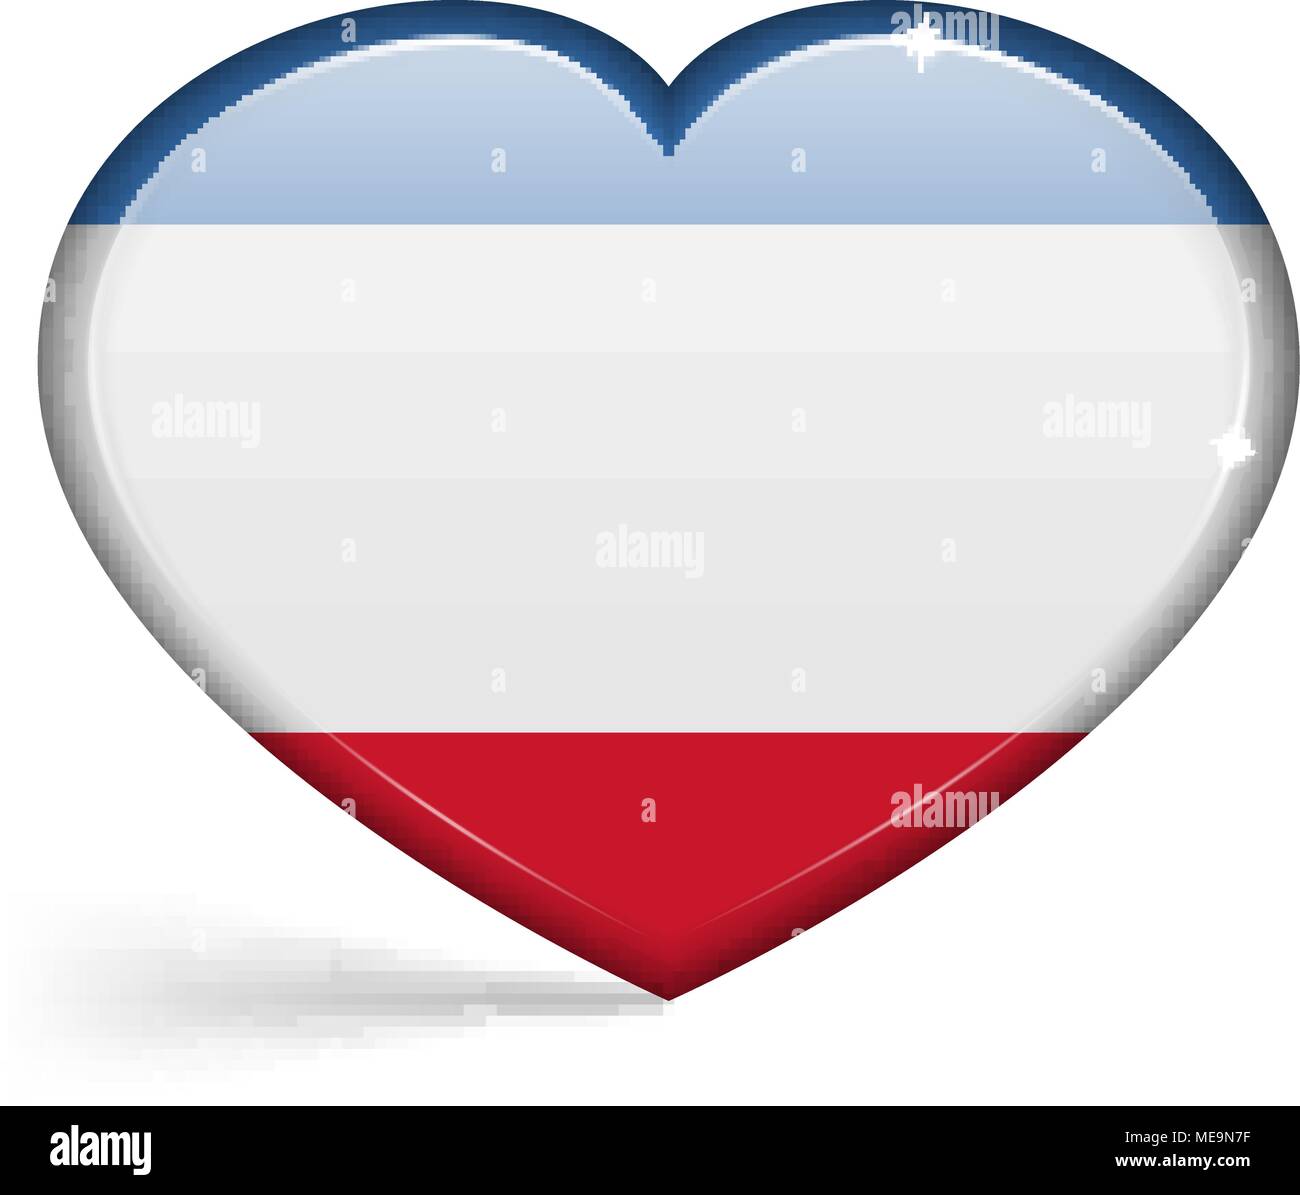 Flags of Crimea in a heart shape with highlights on the edges. Vector illustration Stock Vector